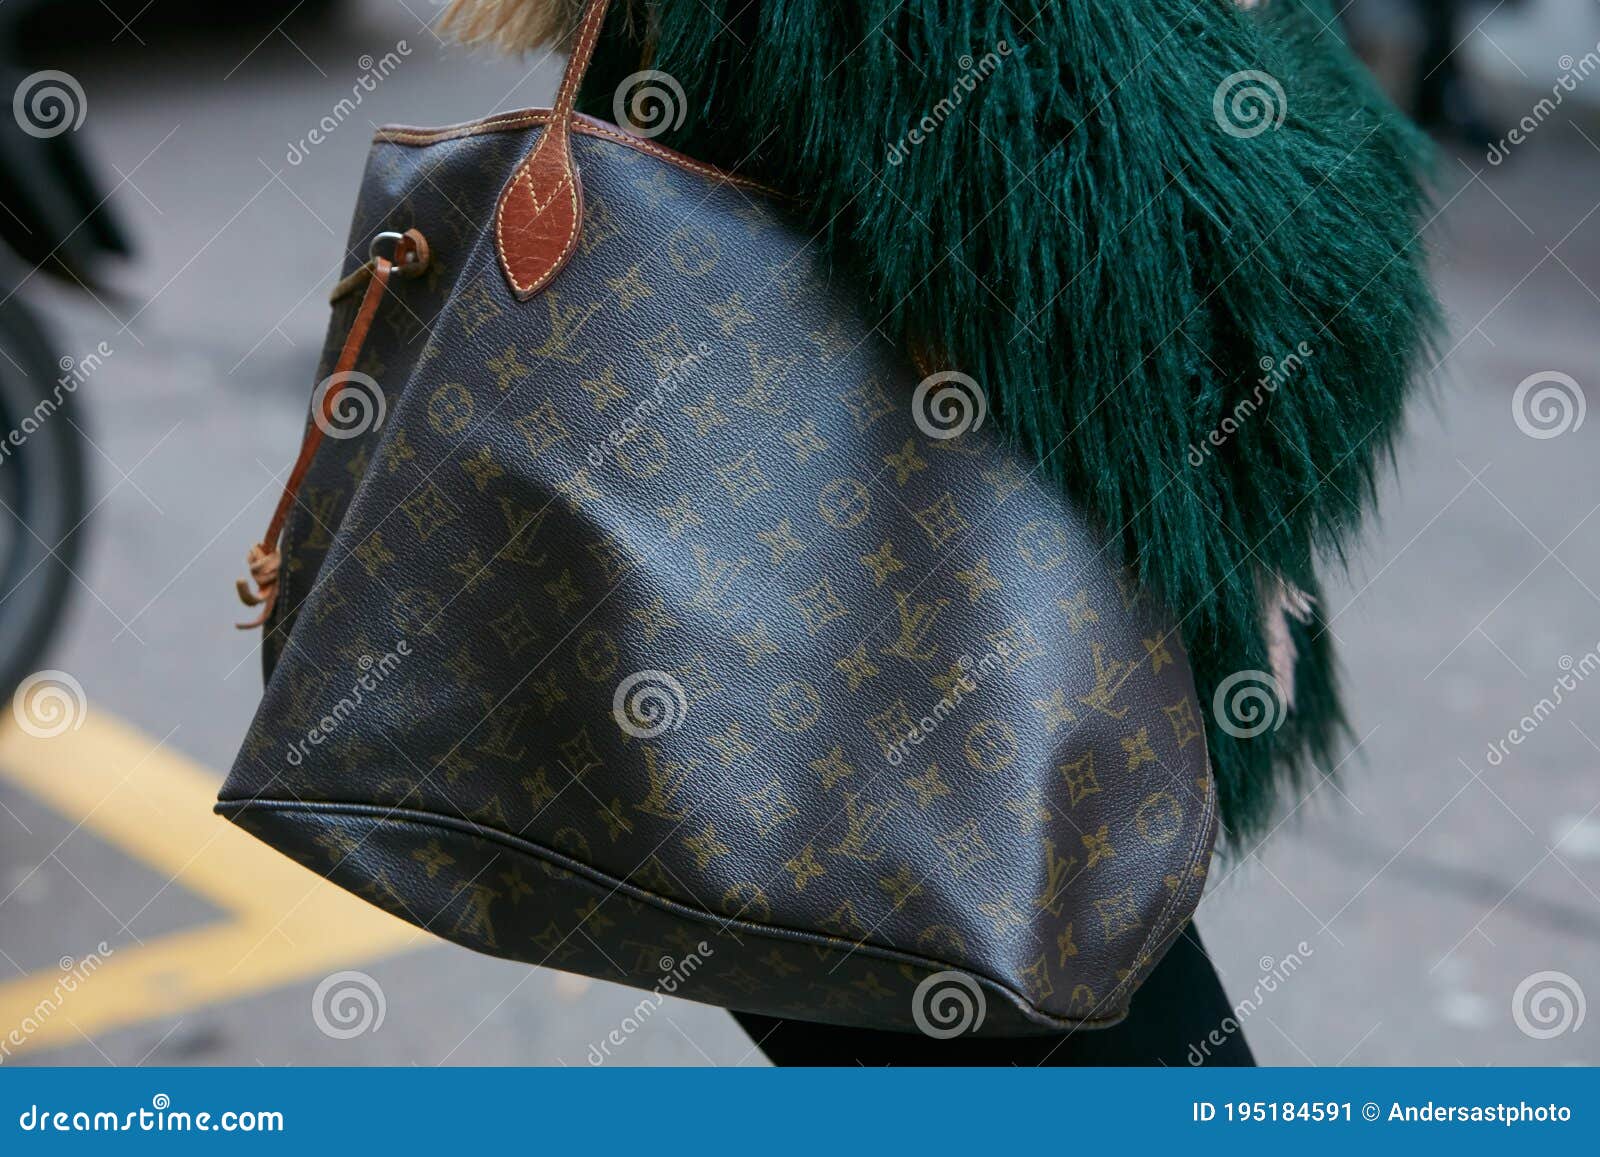 Woman with Louis Vuitton Bag and Green Fur Coat before Blumarine